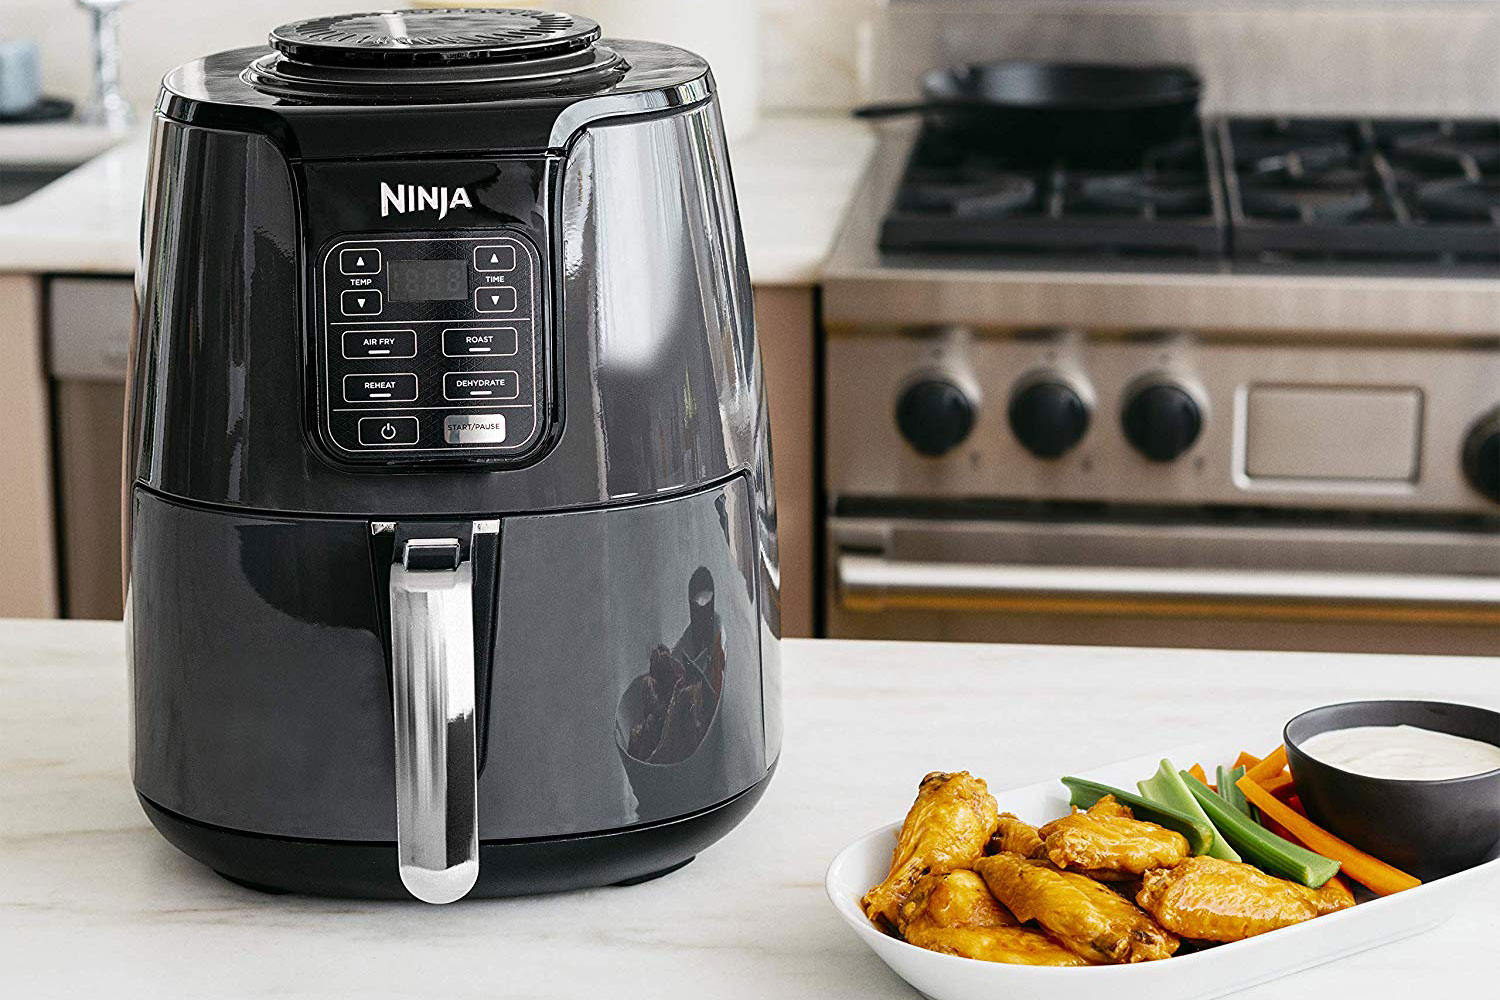 Last-minute Mother's Day win: This 4.5-quart Gourmia air fryer for $59.99 -  CNET